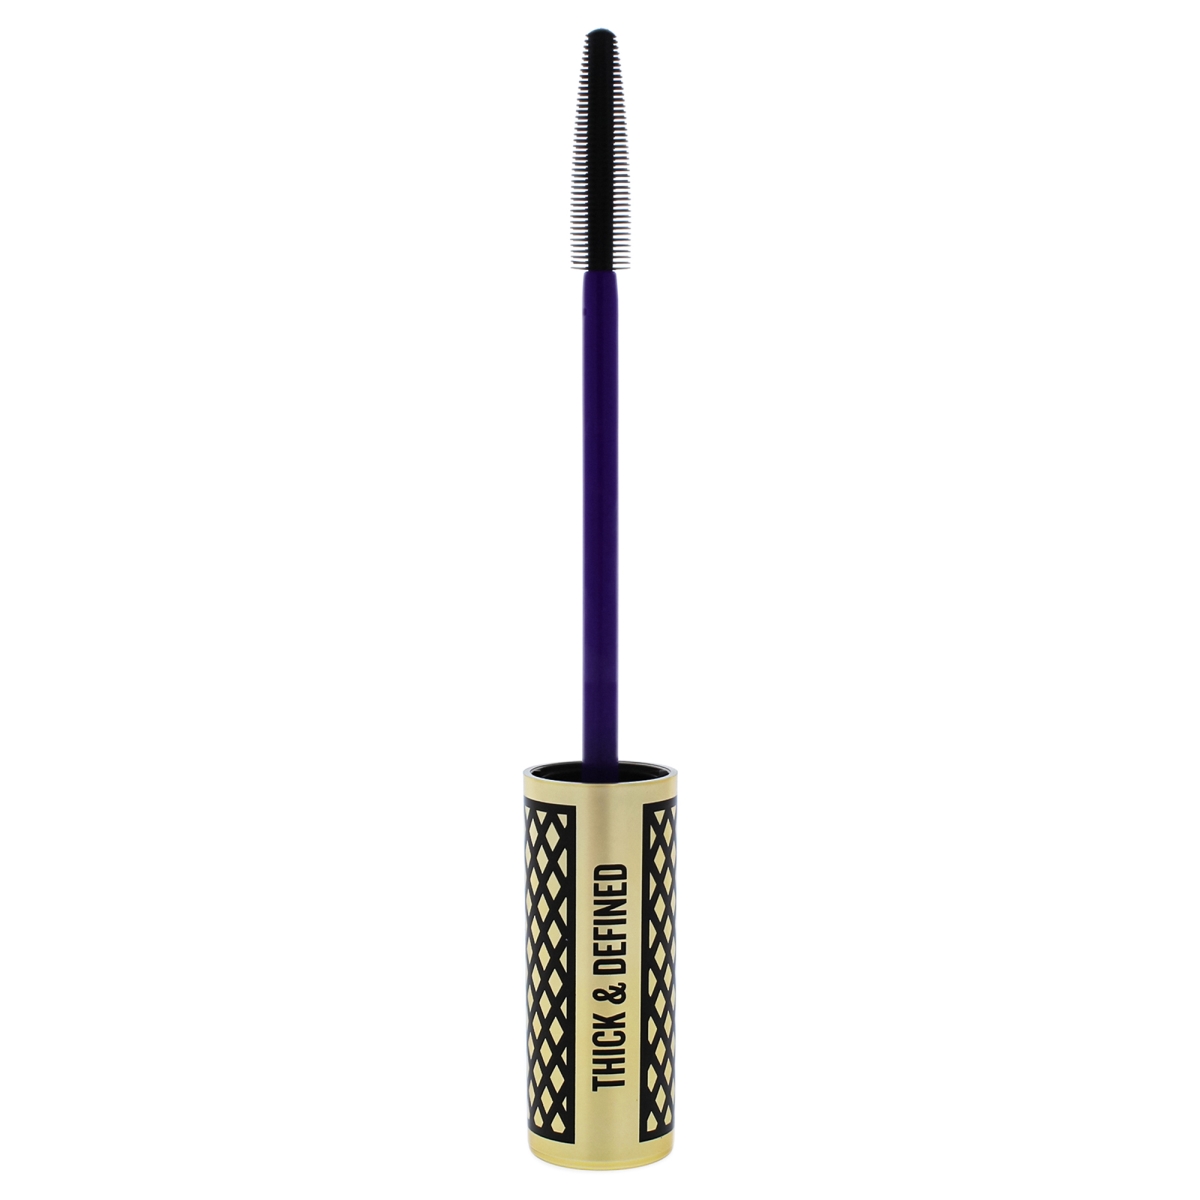 I0086687 Thick & Defined Mascara Wand For Women